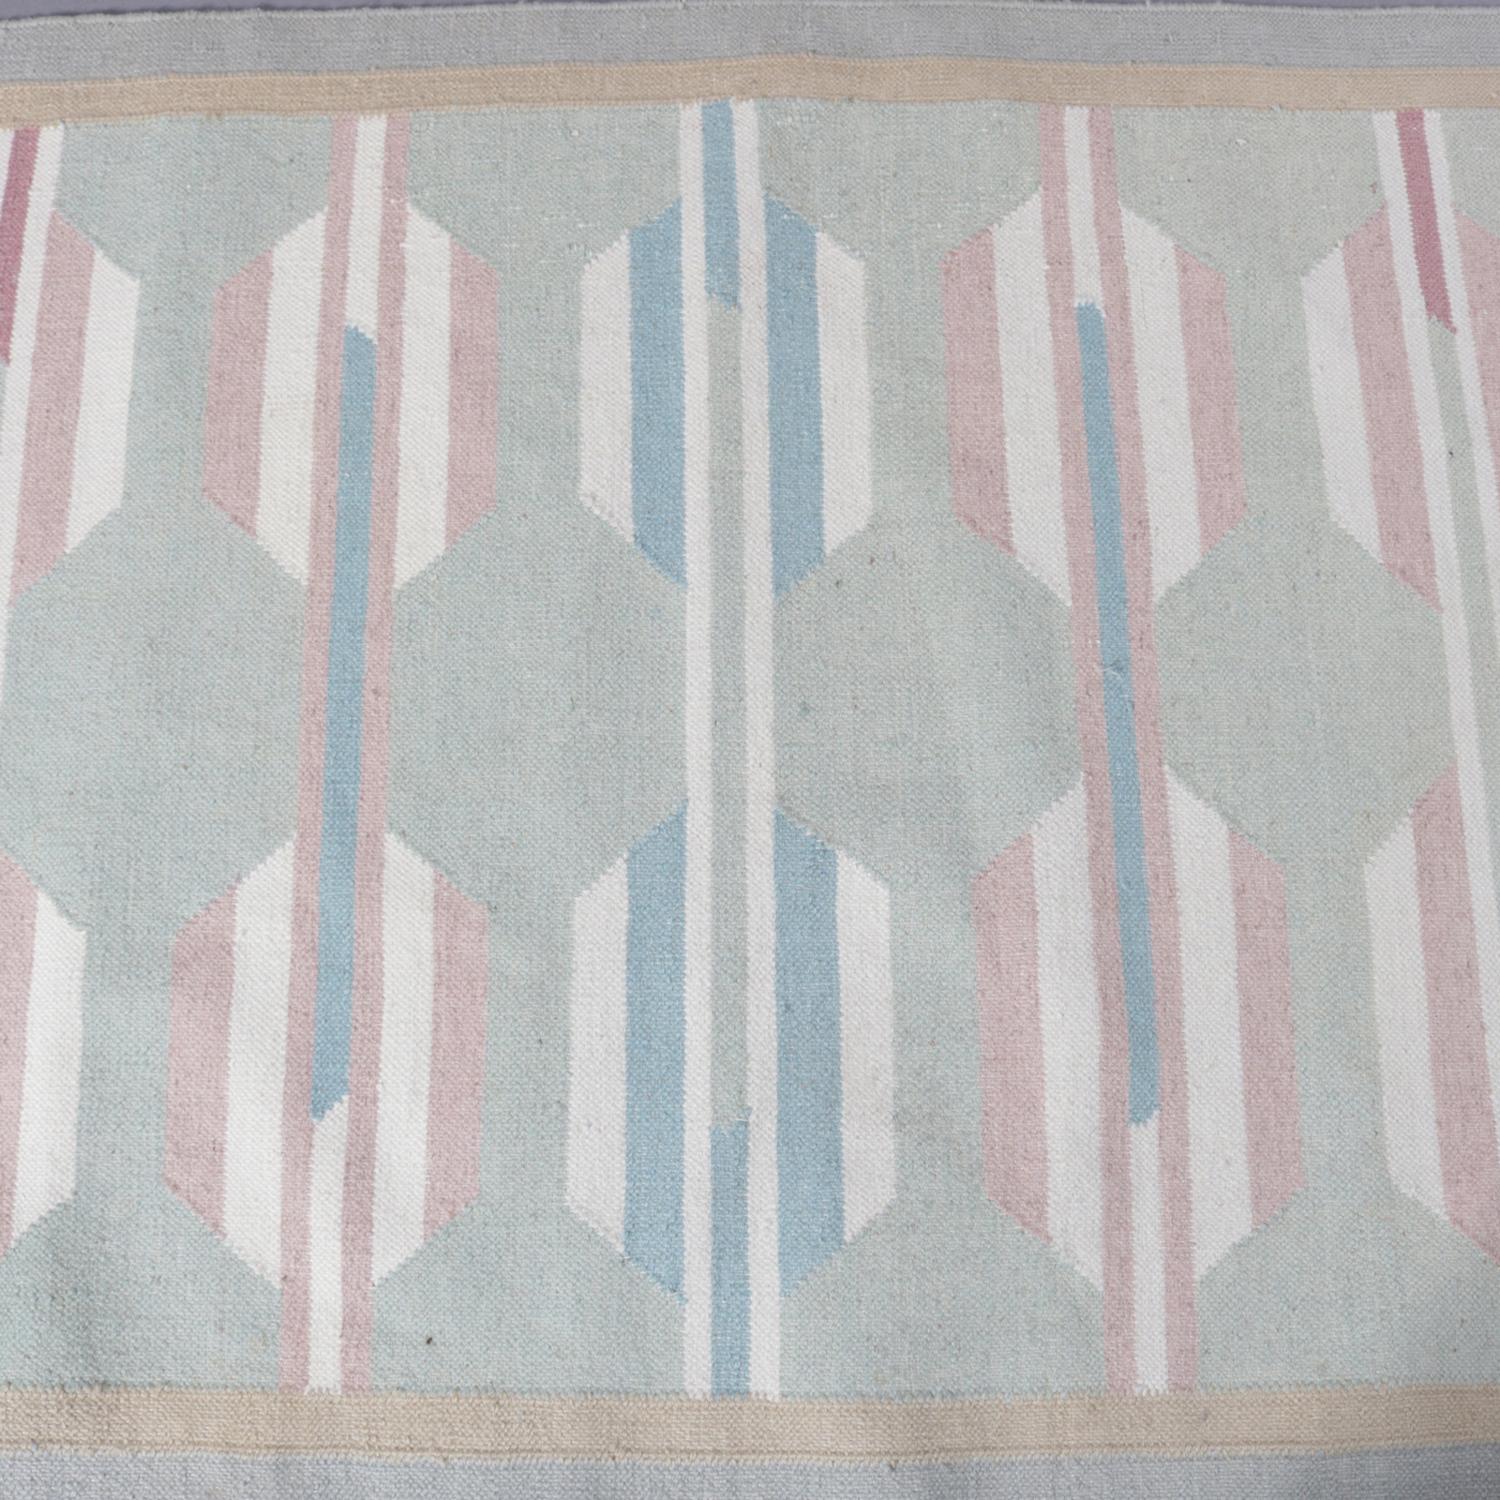 A Native American Indian Navajo style area rug features repeating central geometric design in pastel green, yellow, ivory, pink and blue, 20th century.

Measures: 59